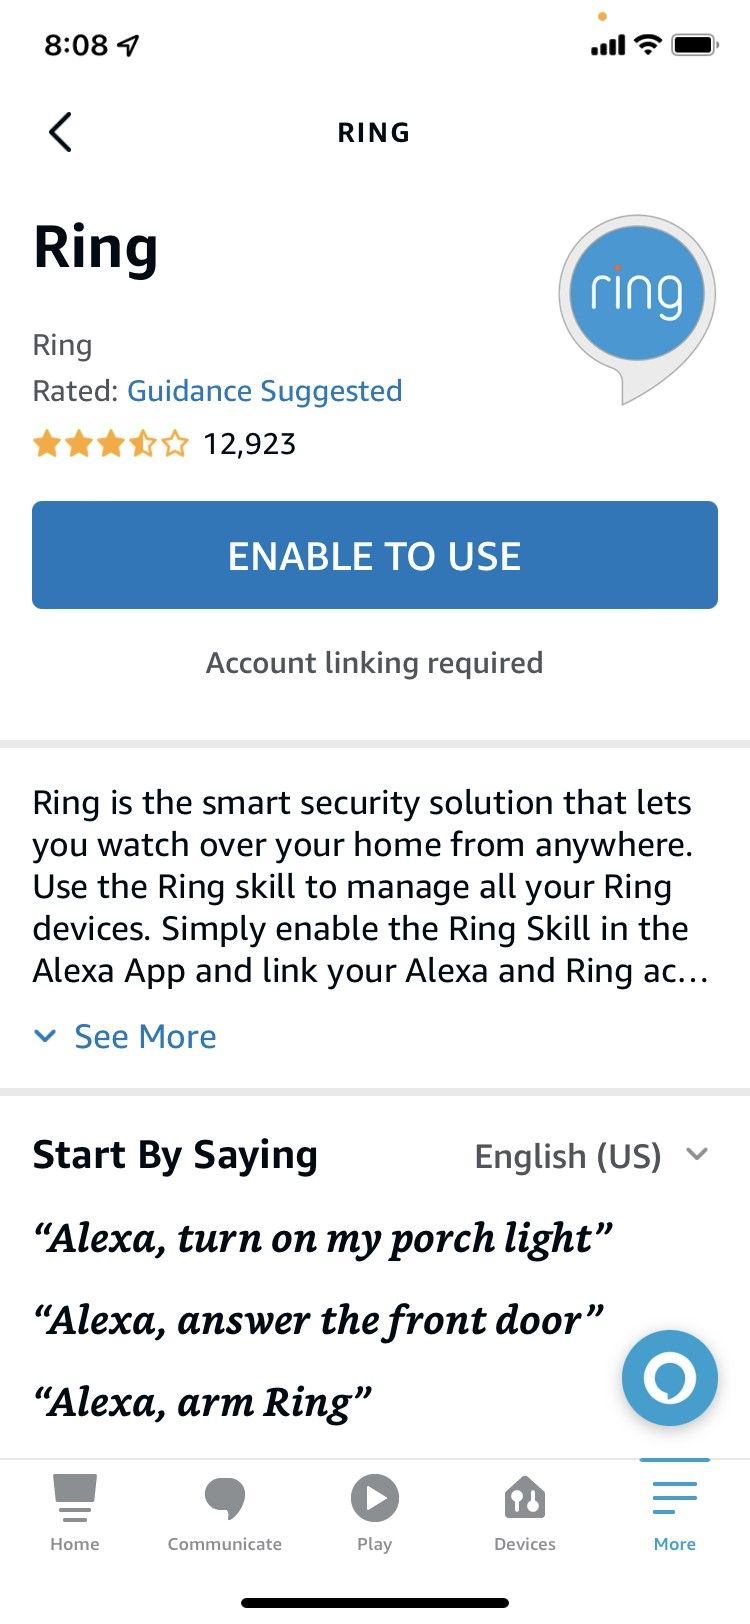 You can tap the ENABLE TO USE button to enable the Alexa and Ring skill